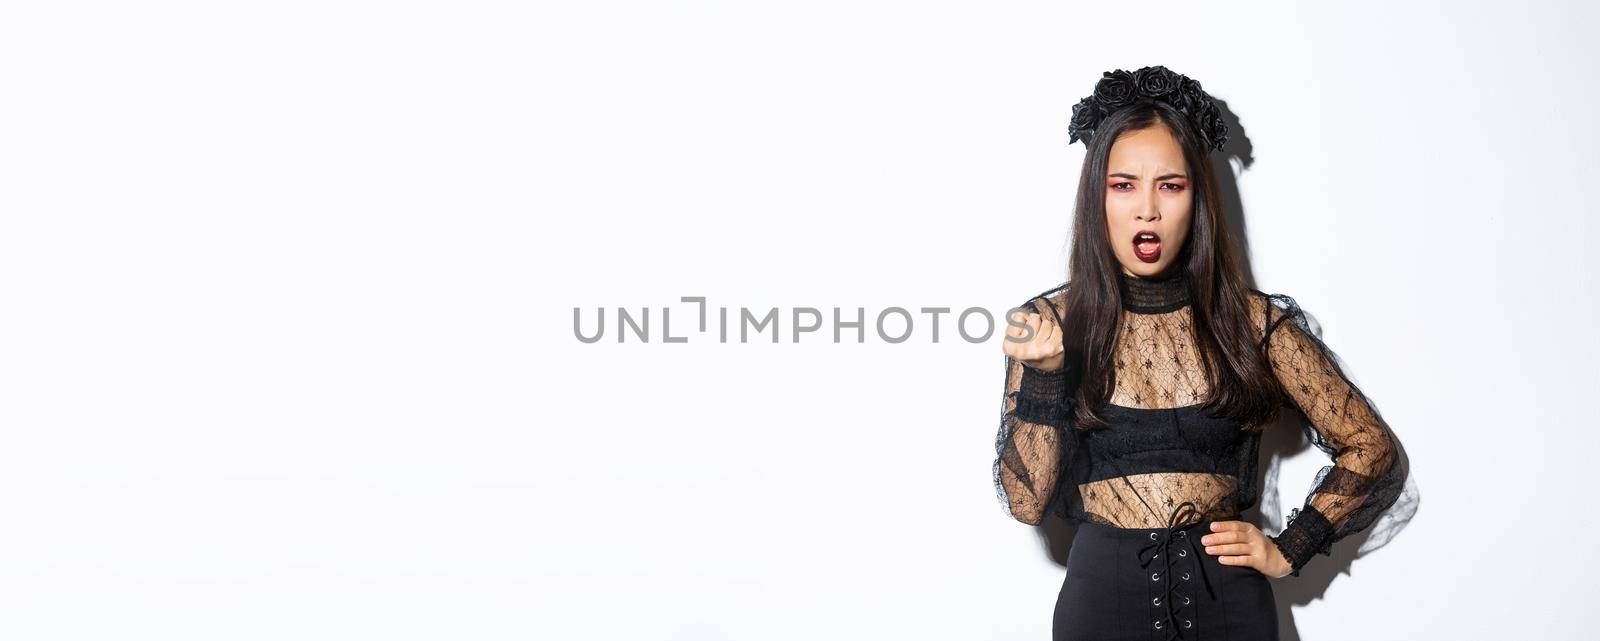 Image of angry and disappointed beautiful girl in halloween costume scolding someone. Girl shaking fist and looking with disapproval, wearing black gothic lace dress, standing white background.